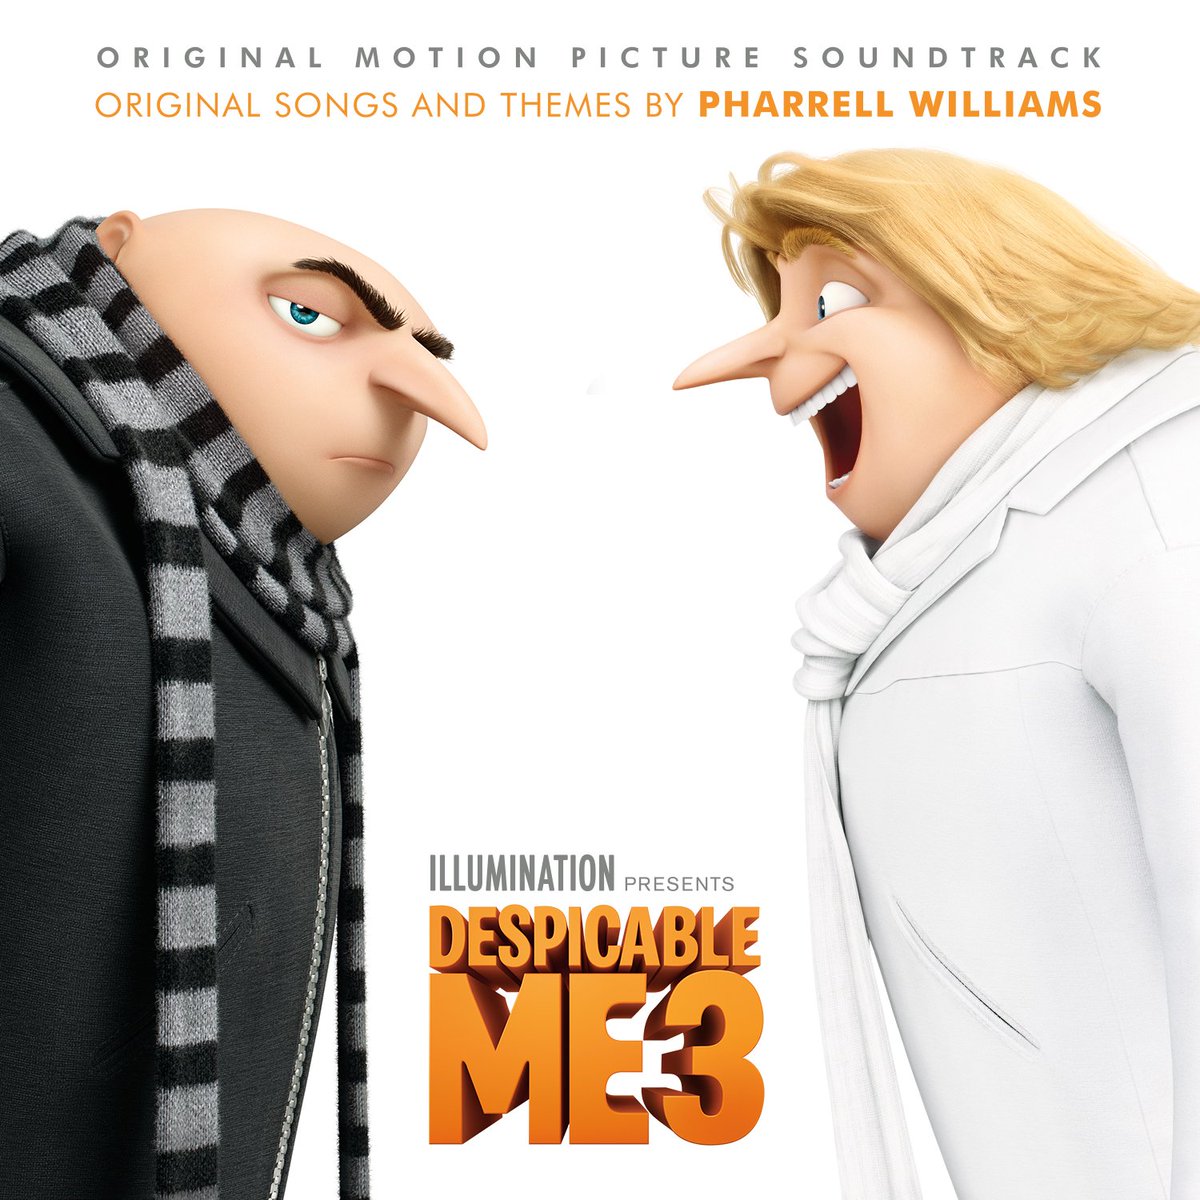 The #DespicableMe3 Soundtrack is out now!  https://t.co/m0vVK9eqIU https://t.co/fNF1ql2N1I